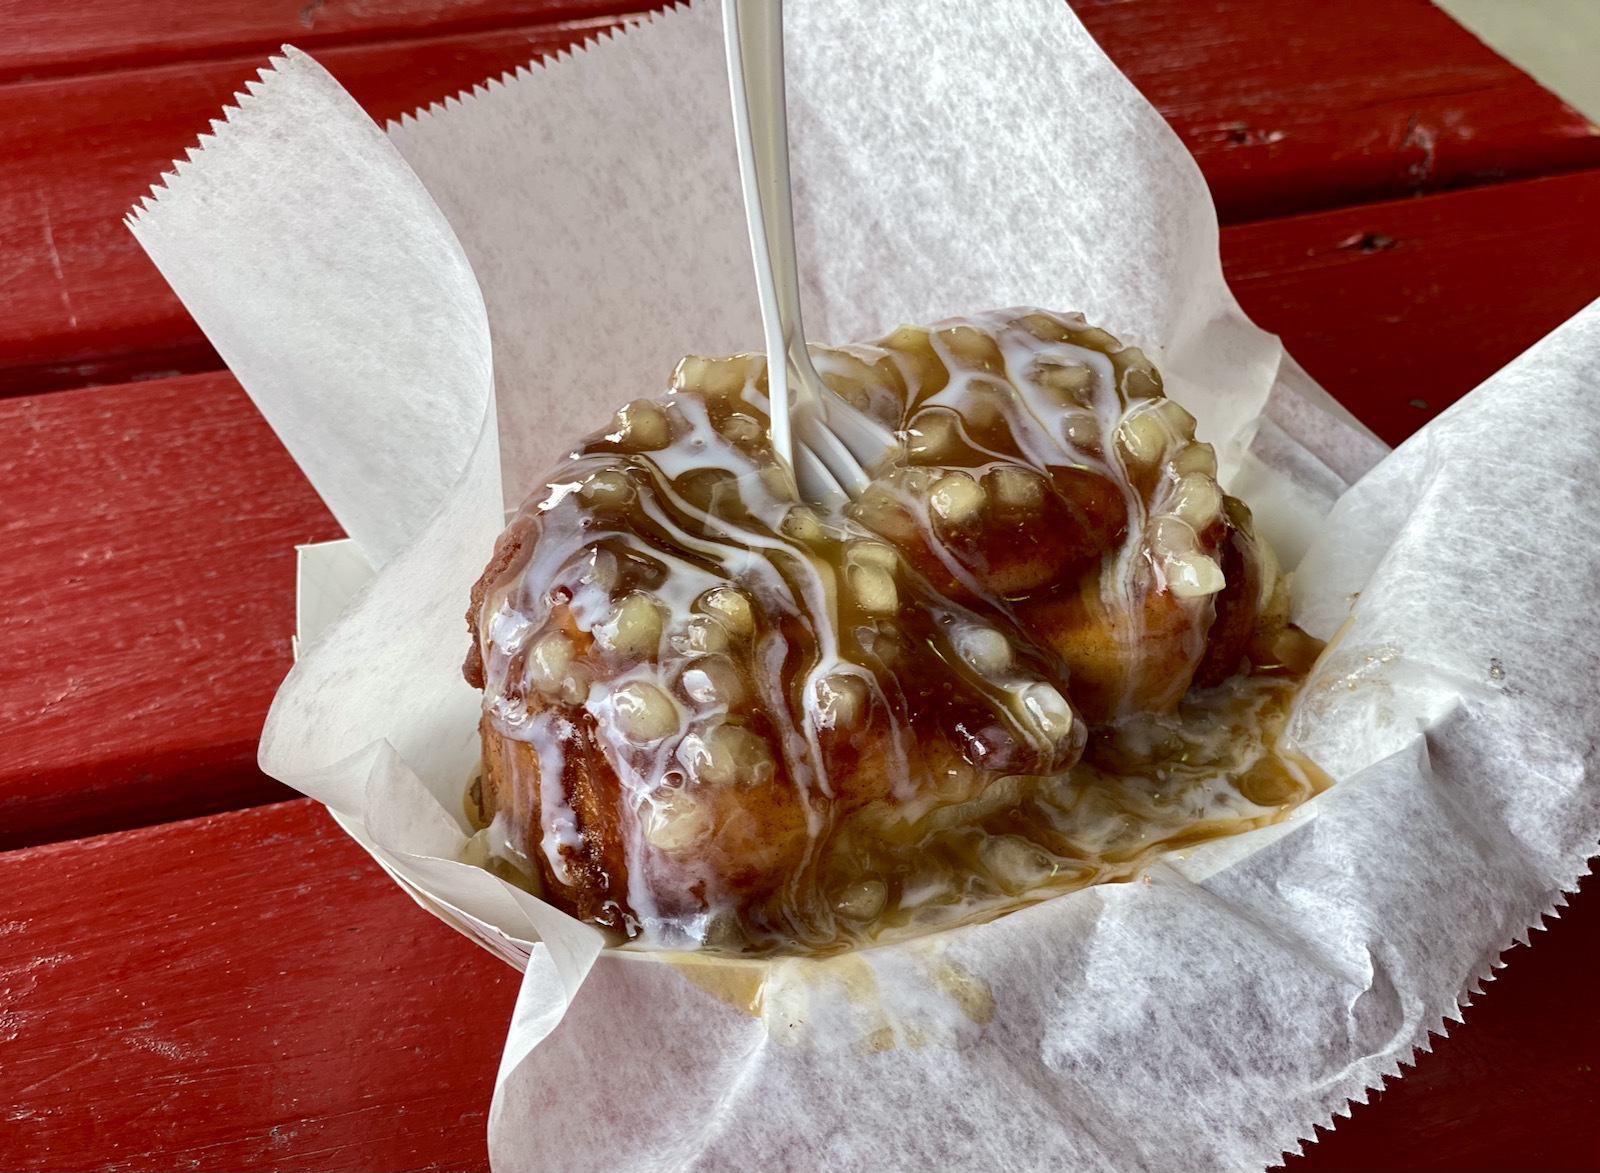 There are 70 new Wisconsin State Fair foods. Which ones should Lori review?